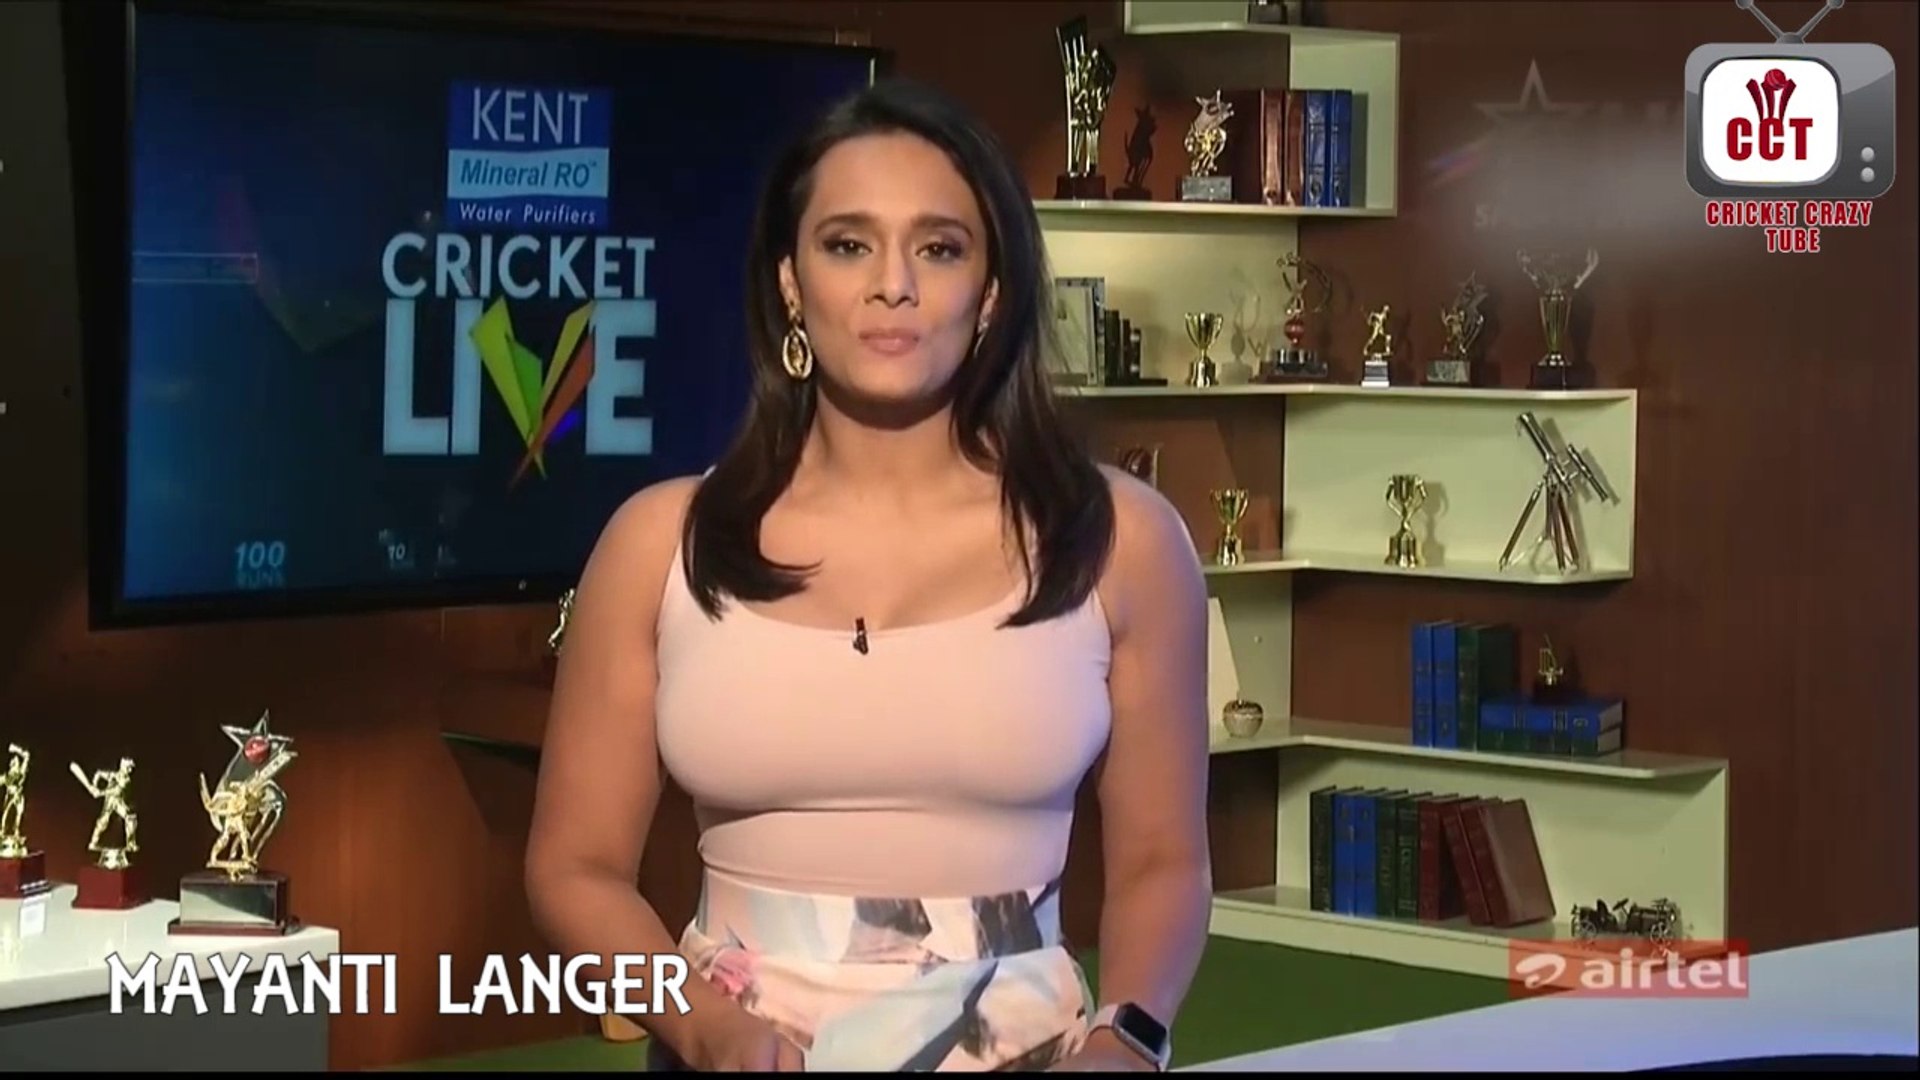 Most sexy cricket anchors part 1 - Mayanti Langer | Cricket Crazy Tube -  video Dailymotion